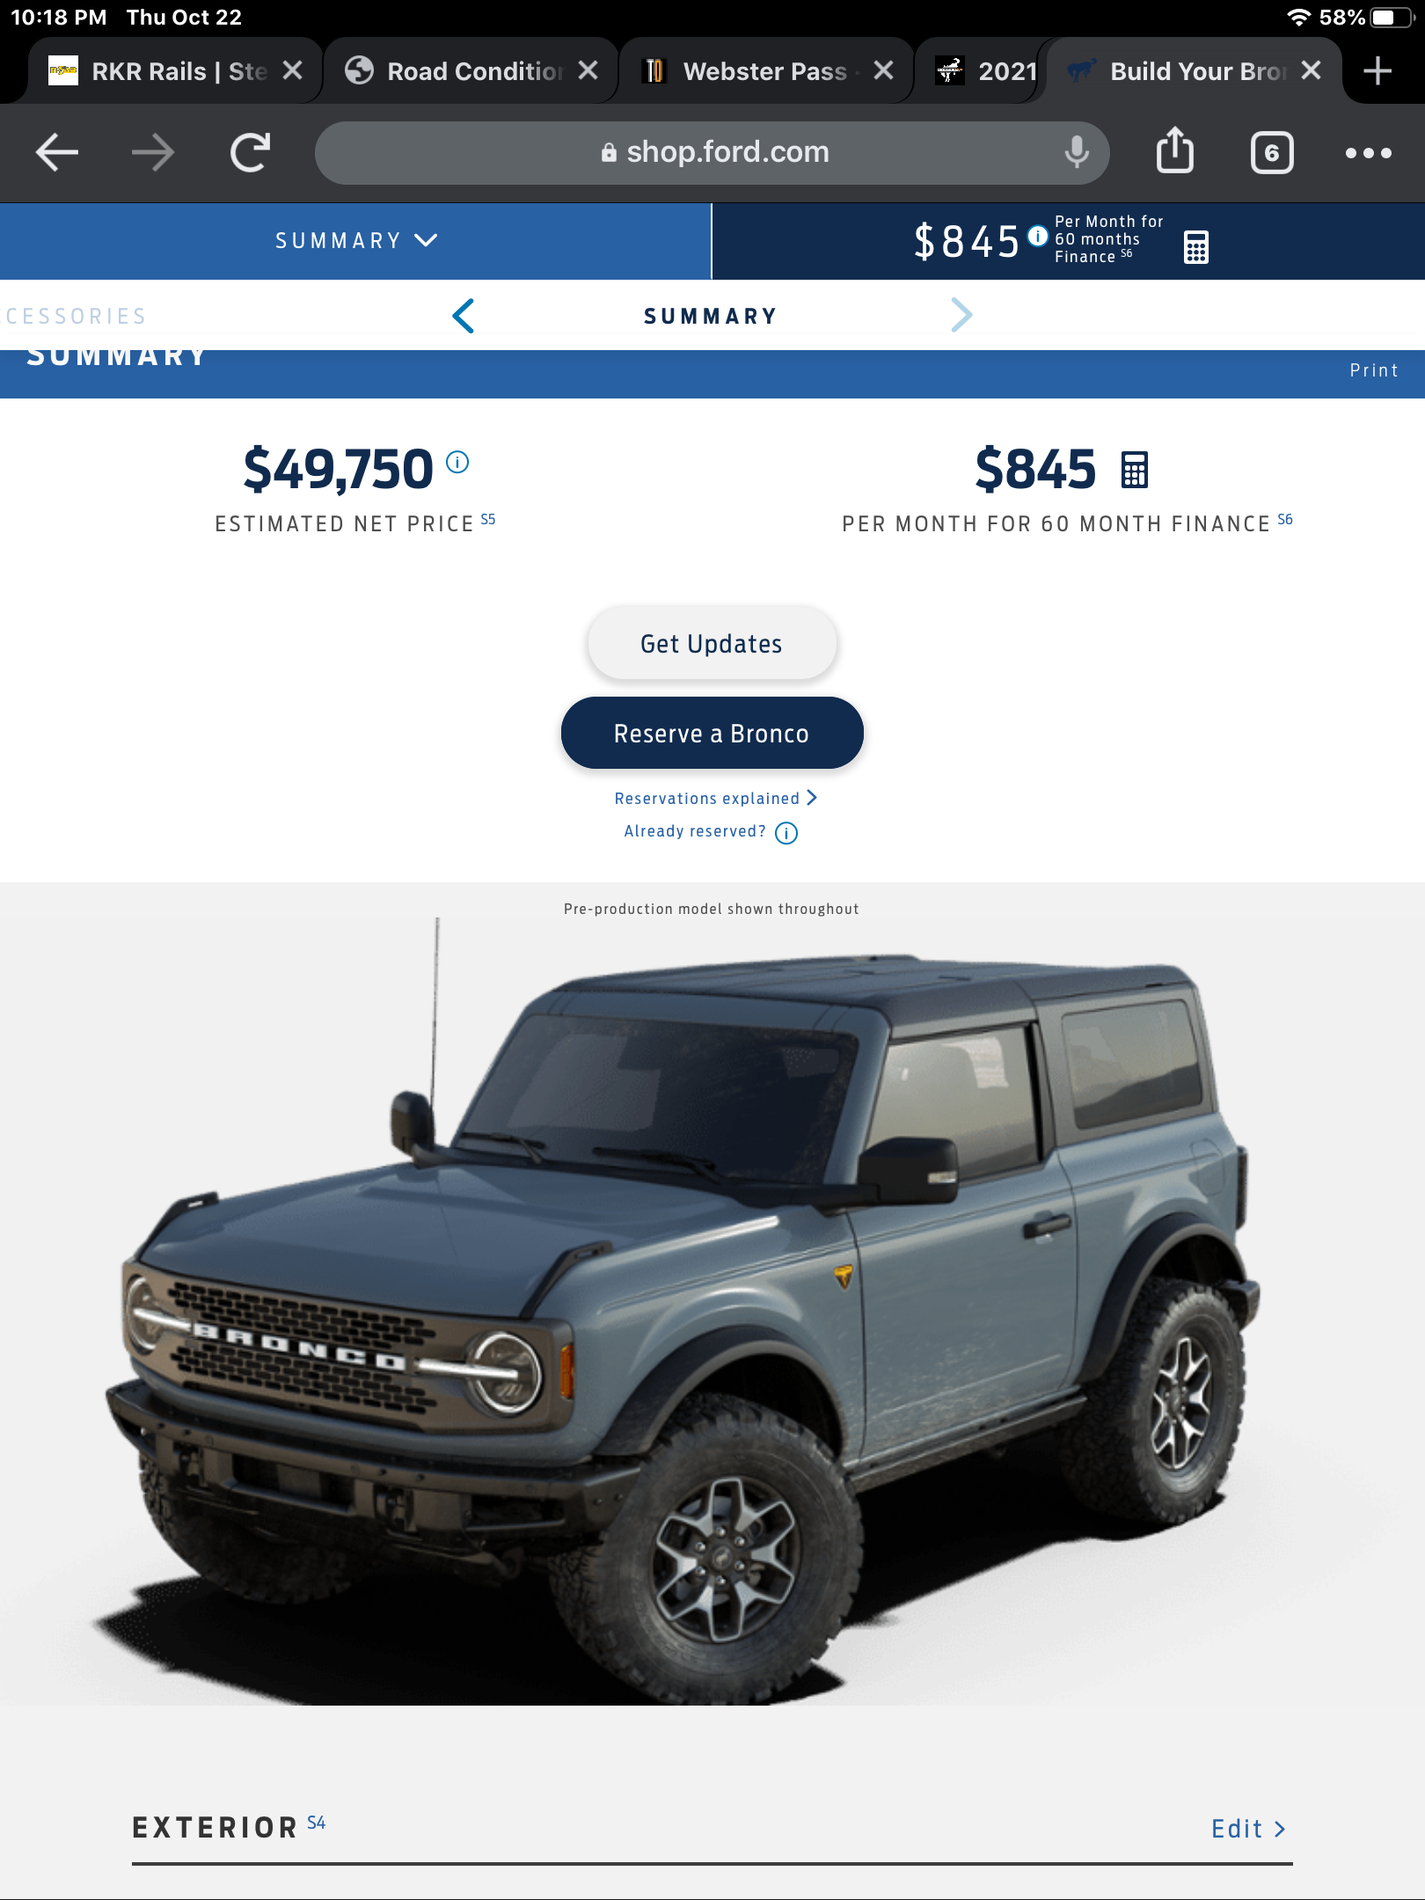 Ford Bronco 2021 Bronco BUILD & PRICE Configurator Is Finally Live (For Real)!! Share your build inside. 31CB3F9B-2136-444C-9762-A119A33D41D5